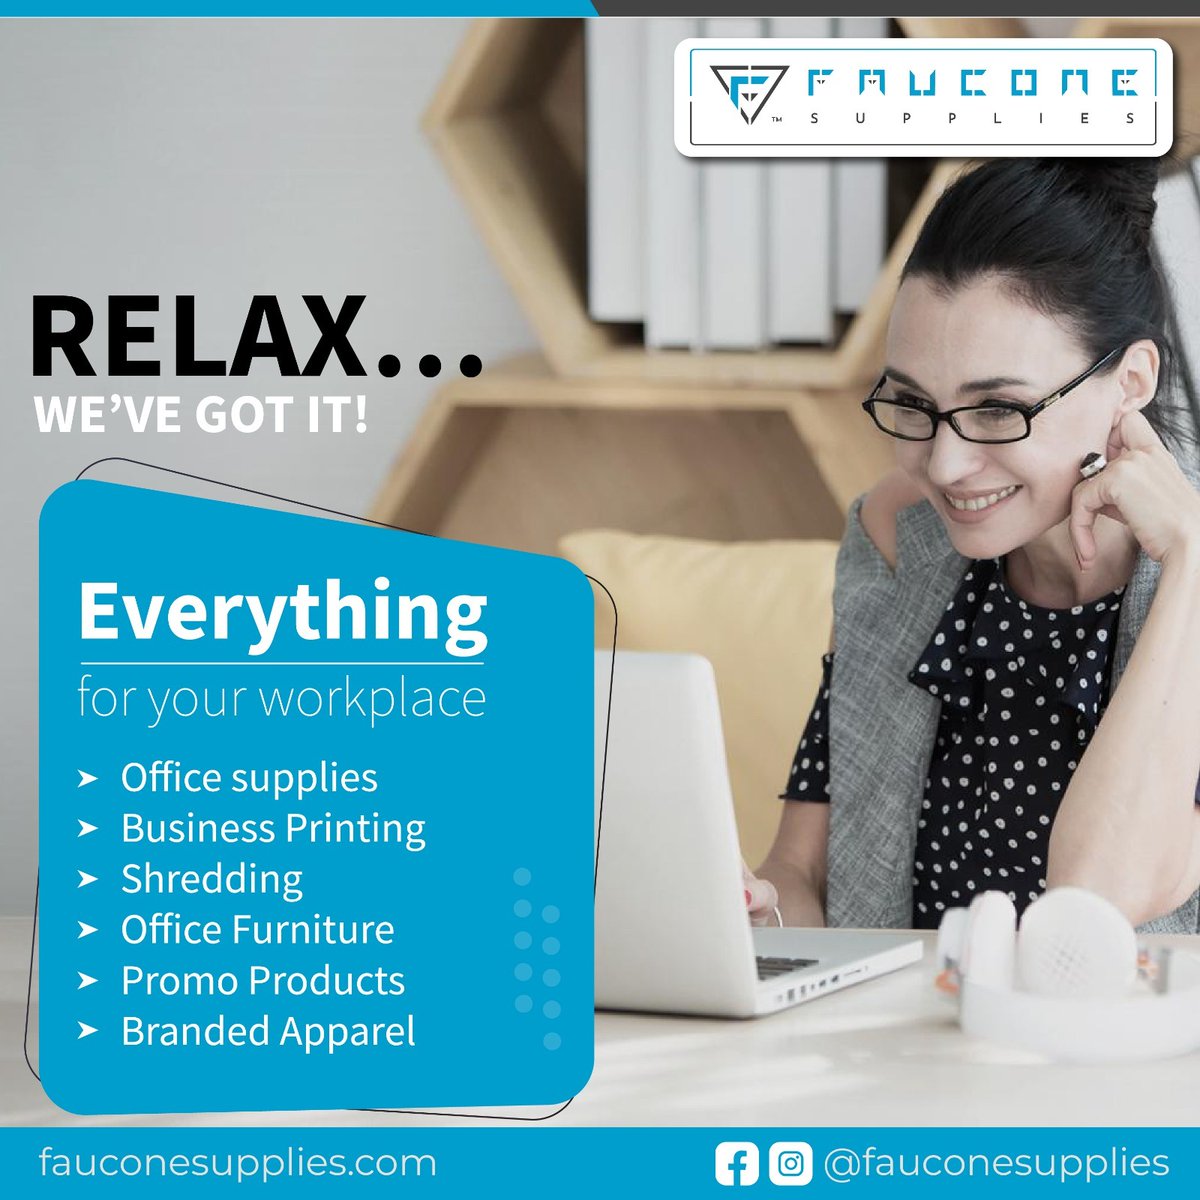 For more information, please call 1800 309 4377 or visit fauconesupplies.com

#faucone #fauconesupplies #stationary #supplies #business #OfficeNeeds #commercialsupplies #discounts #officesupply #globally #businessoffice #workplace #discountoffer #bulkpurchase #chennai